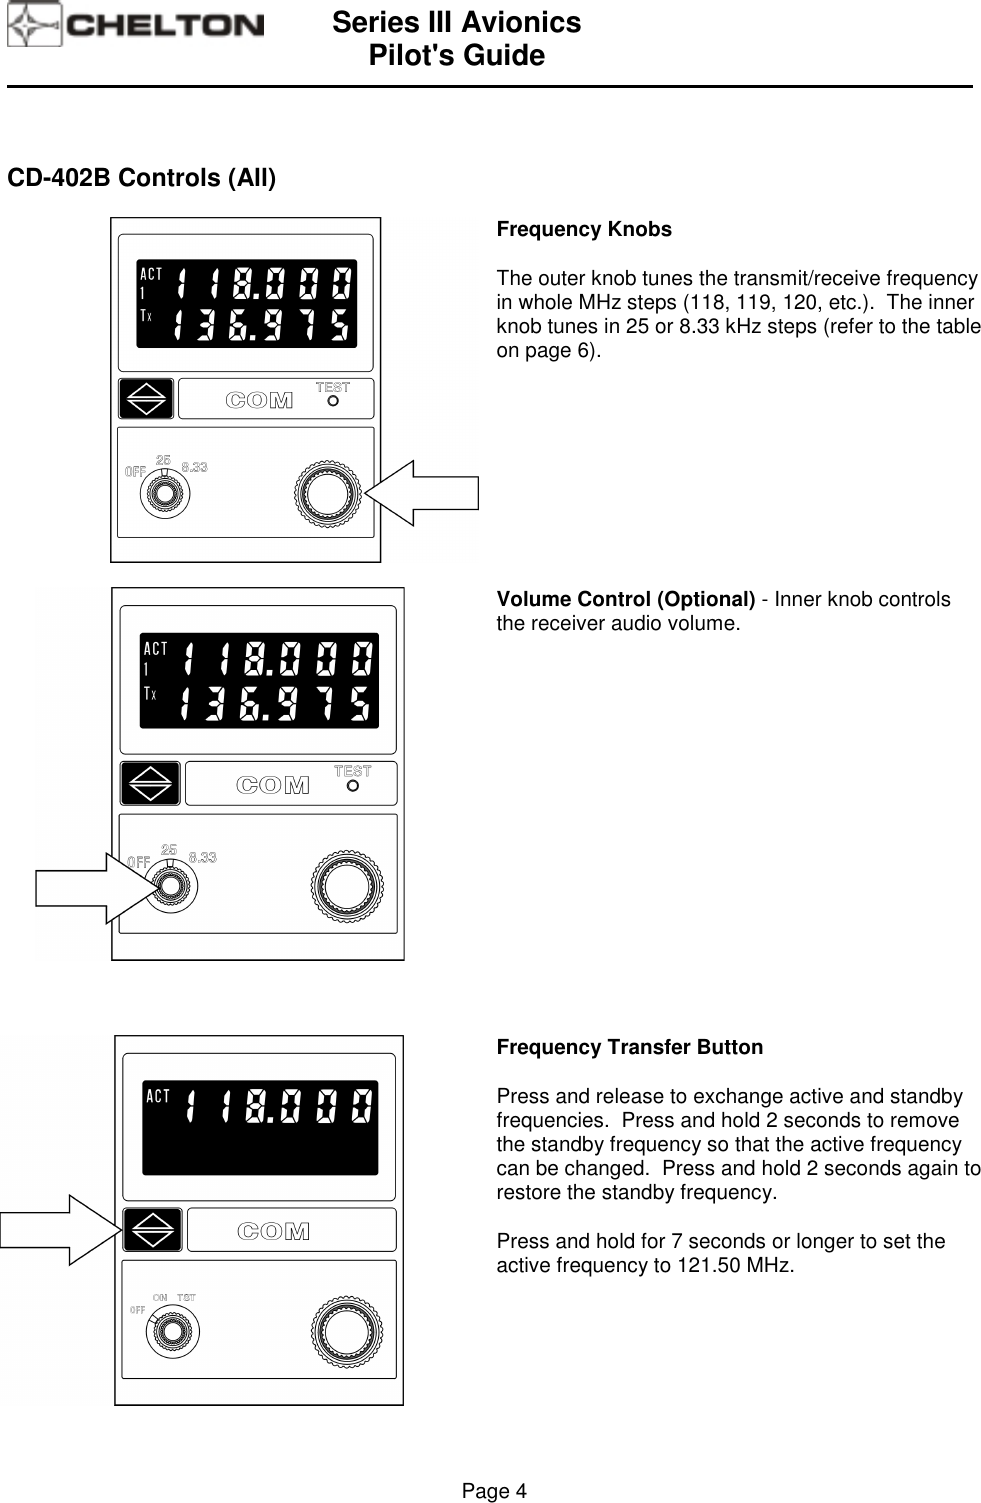 Series III AvionicsPilot&apos;s Guide                                                                                                                                          Page 4CD-402B Controls (All)Frequency KnobsThe outer knob tunes the transmit/receive frequencyin whole MHz steps (118, 119, 120, etc.).  The innerknob tunes in 25 or 8.33 kHz steps (refer to the tableon page 6).Volume Control (Optional) - Inner knob controlsthe receiver audio volume.Frequency Transfer ButtonPress and release to exchange active and standbyfrequencies.  Press and hold 2 seconds to removethe standby frequency so that the active frequencycan be changed.  Press and hold 2 seconds again torestore the standby frequency.Press and hold for 7 seconds or longer to set theactive frequency to 121.50 MHz.